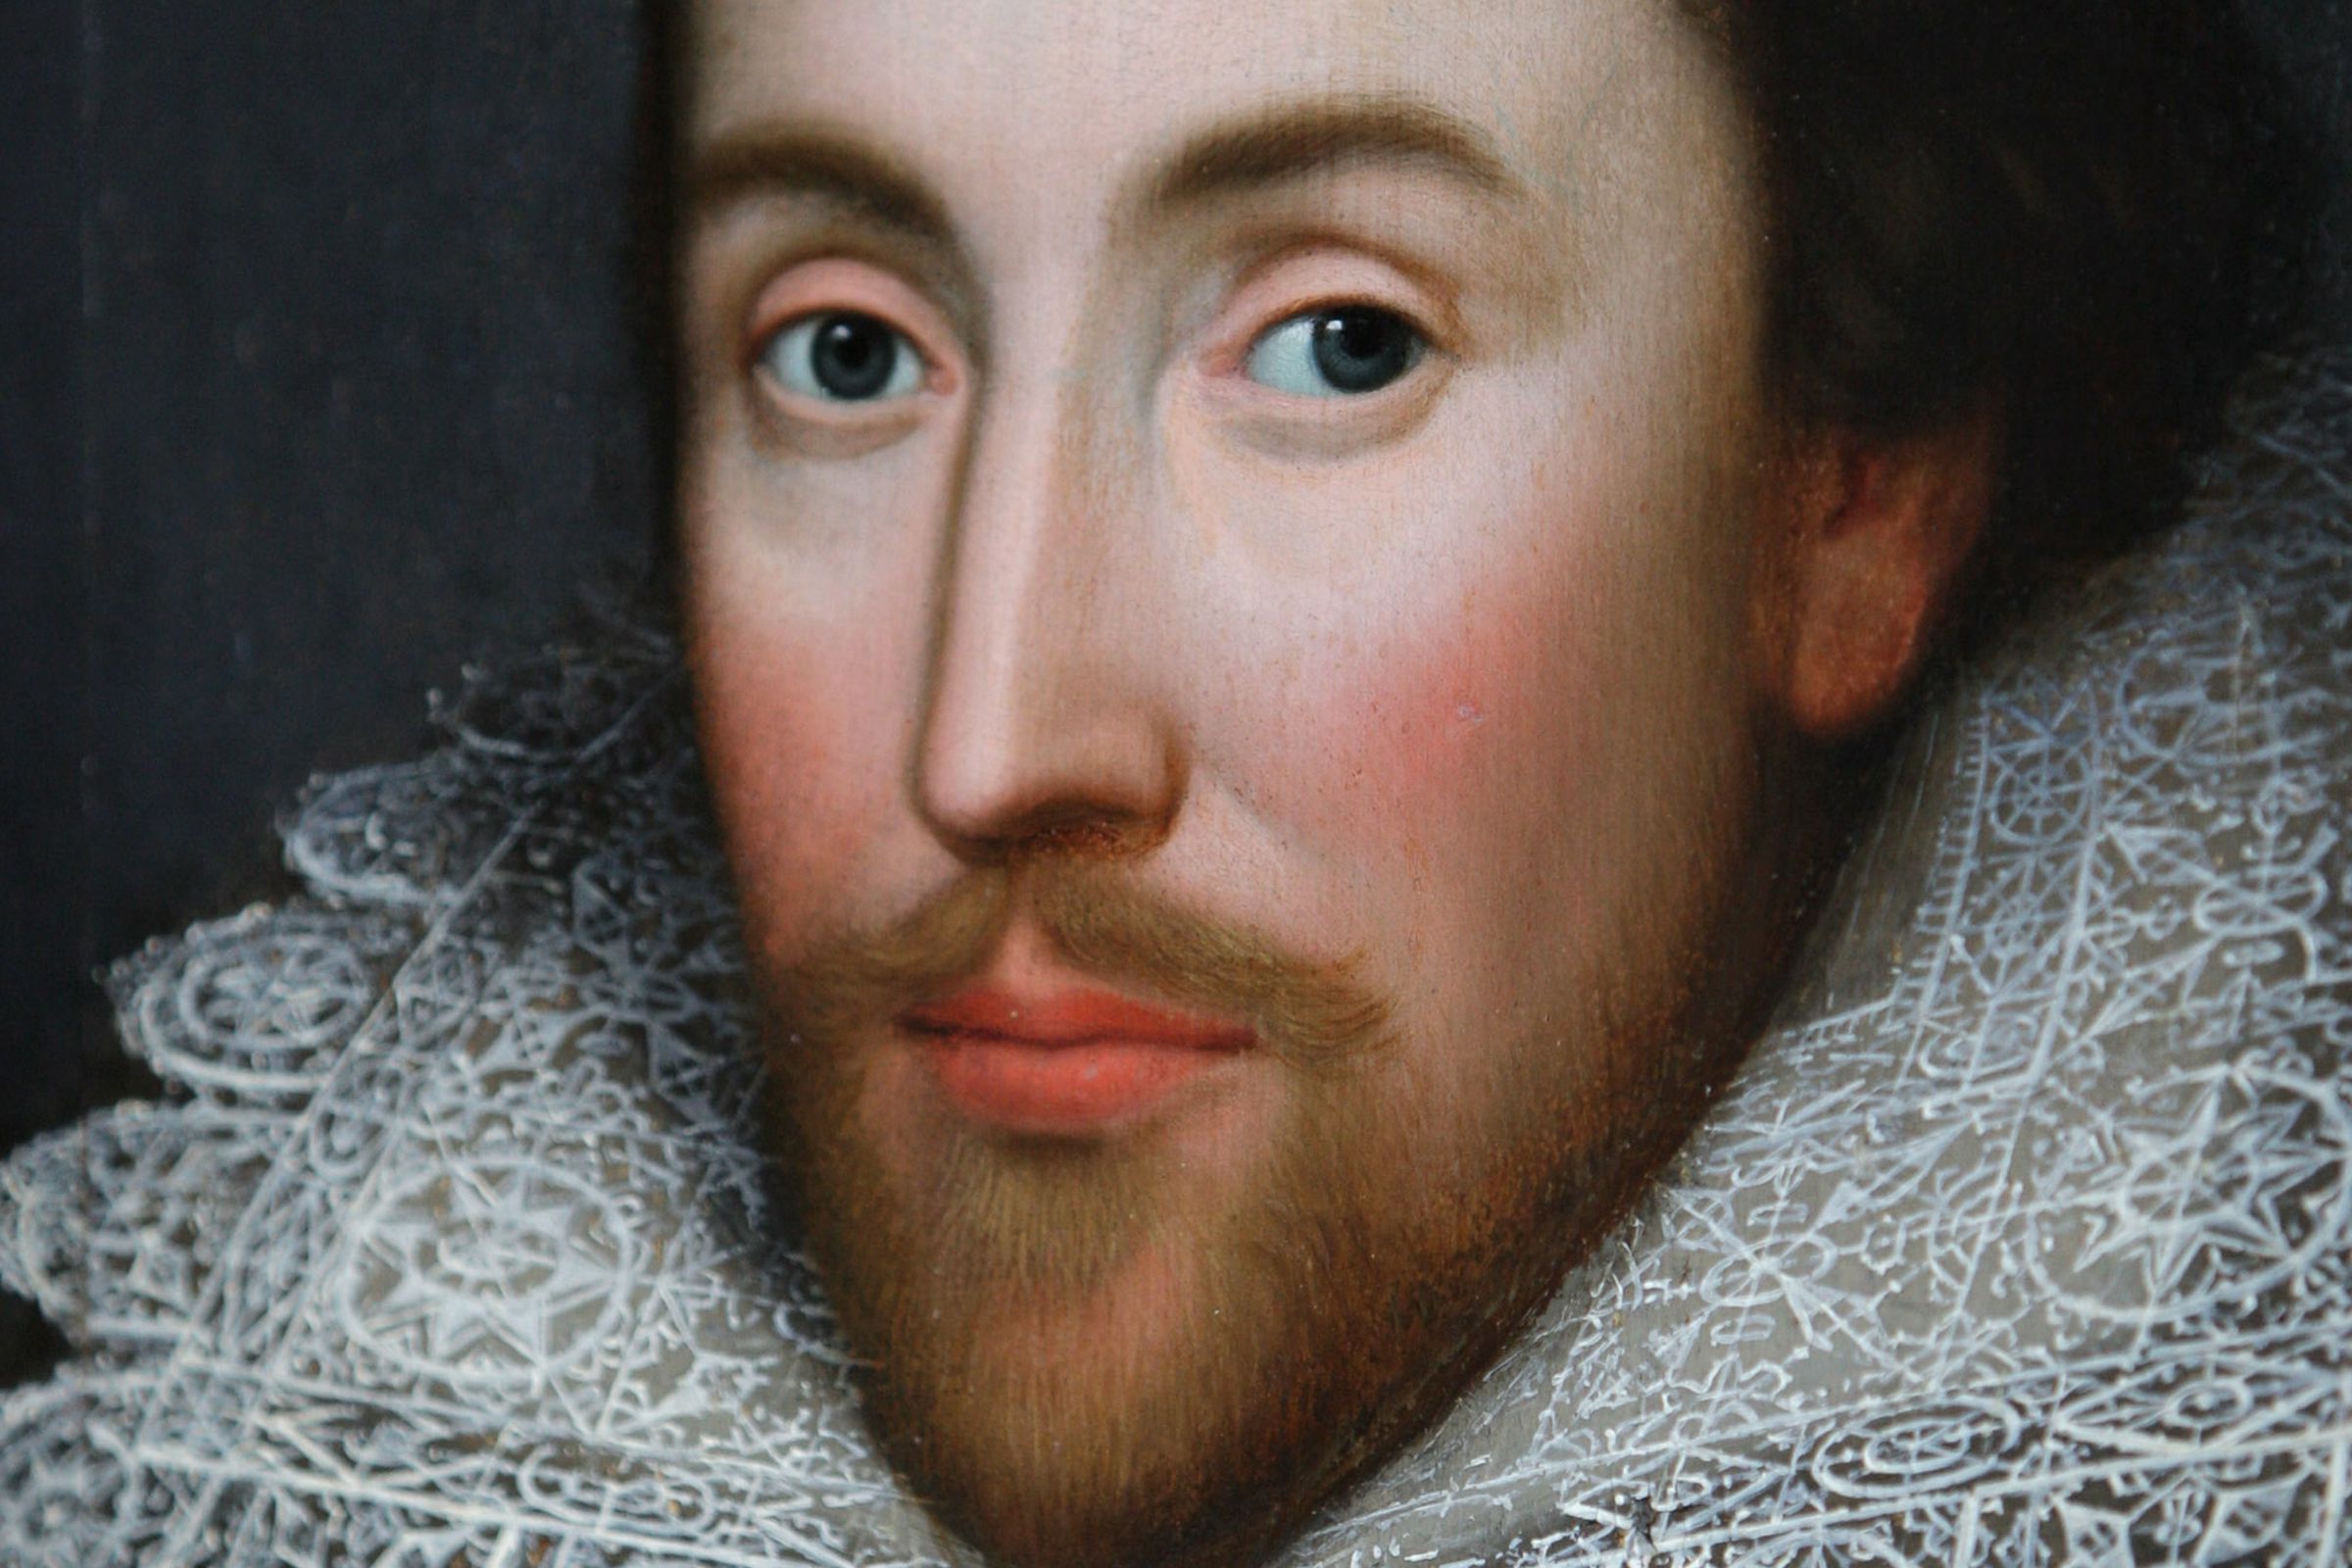 Newly Identified Portrait Of William Shakespeare Is Unveiled